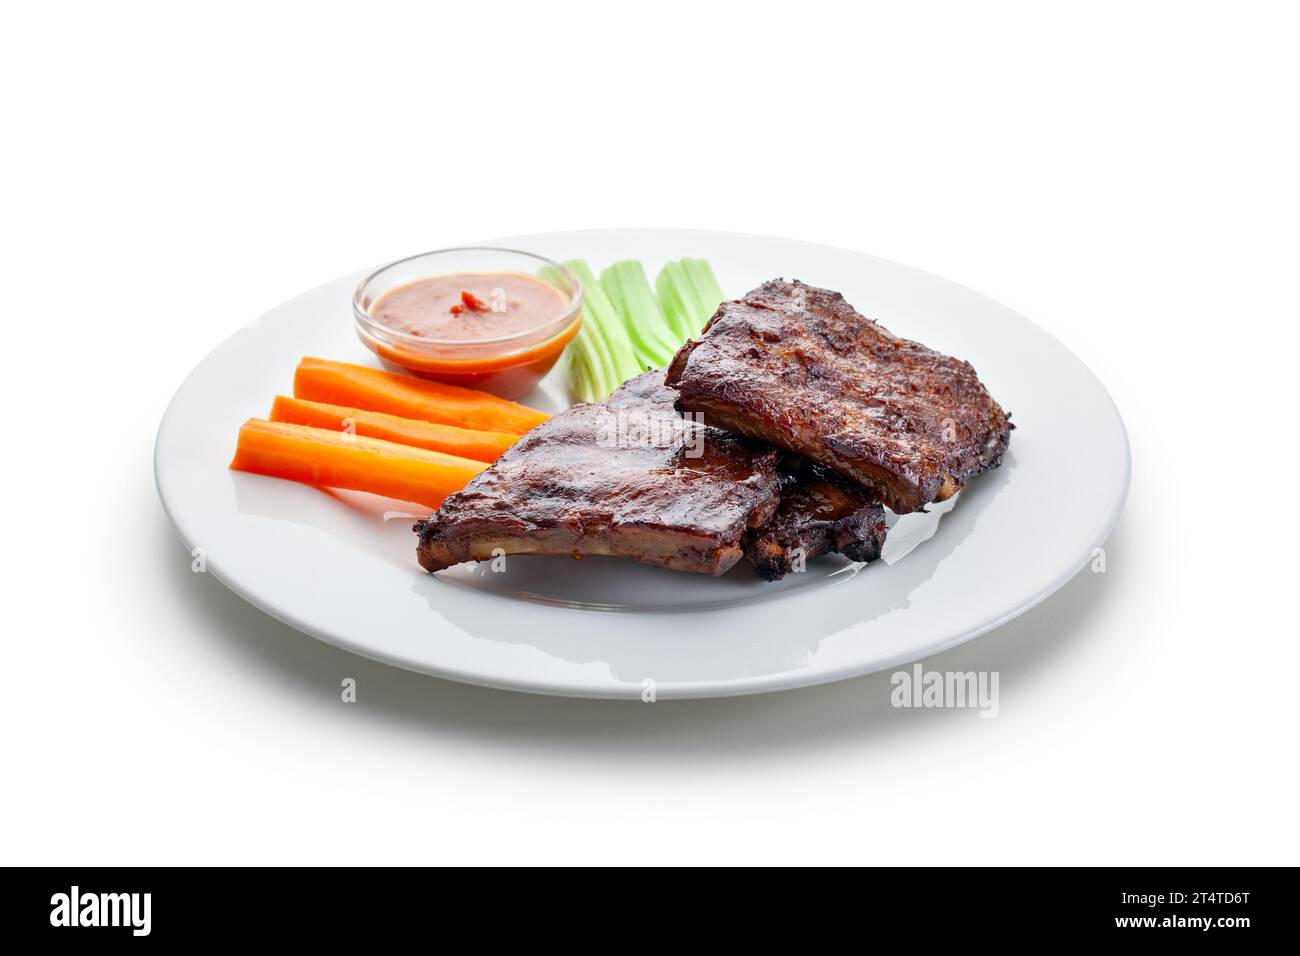 BBQ ribs, carrot, stalked celery, meat with vegetable, dressing Stock Photo